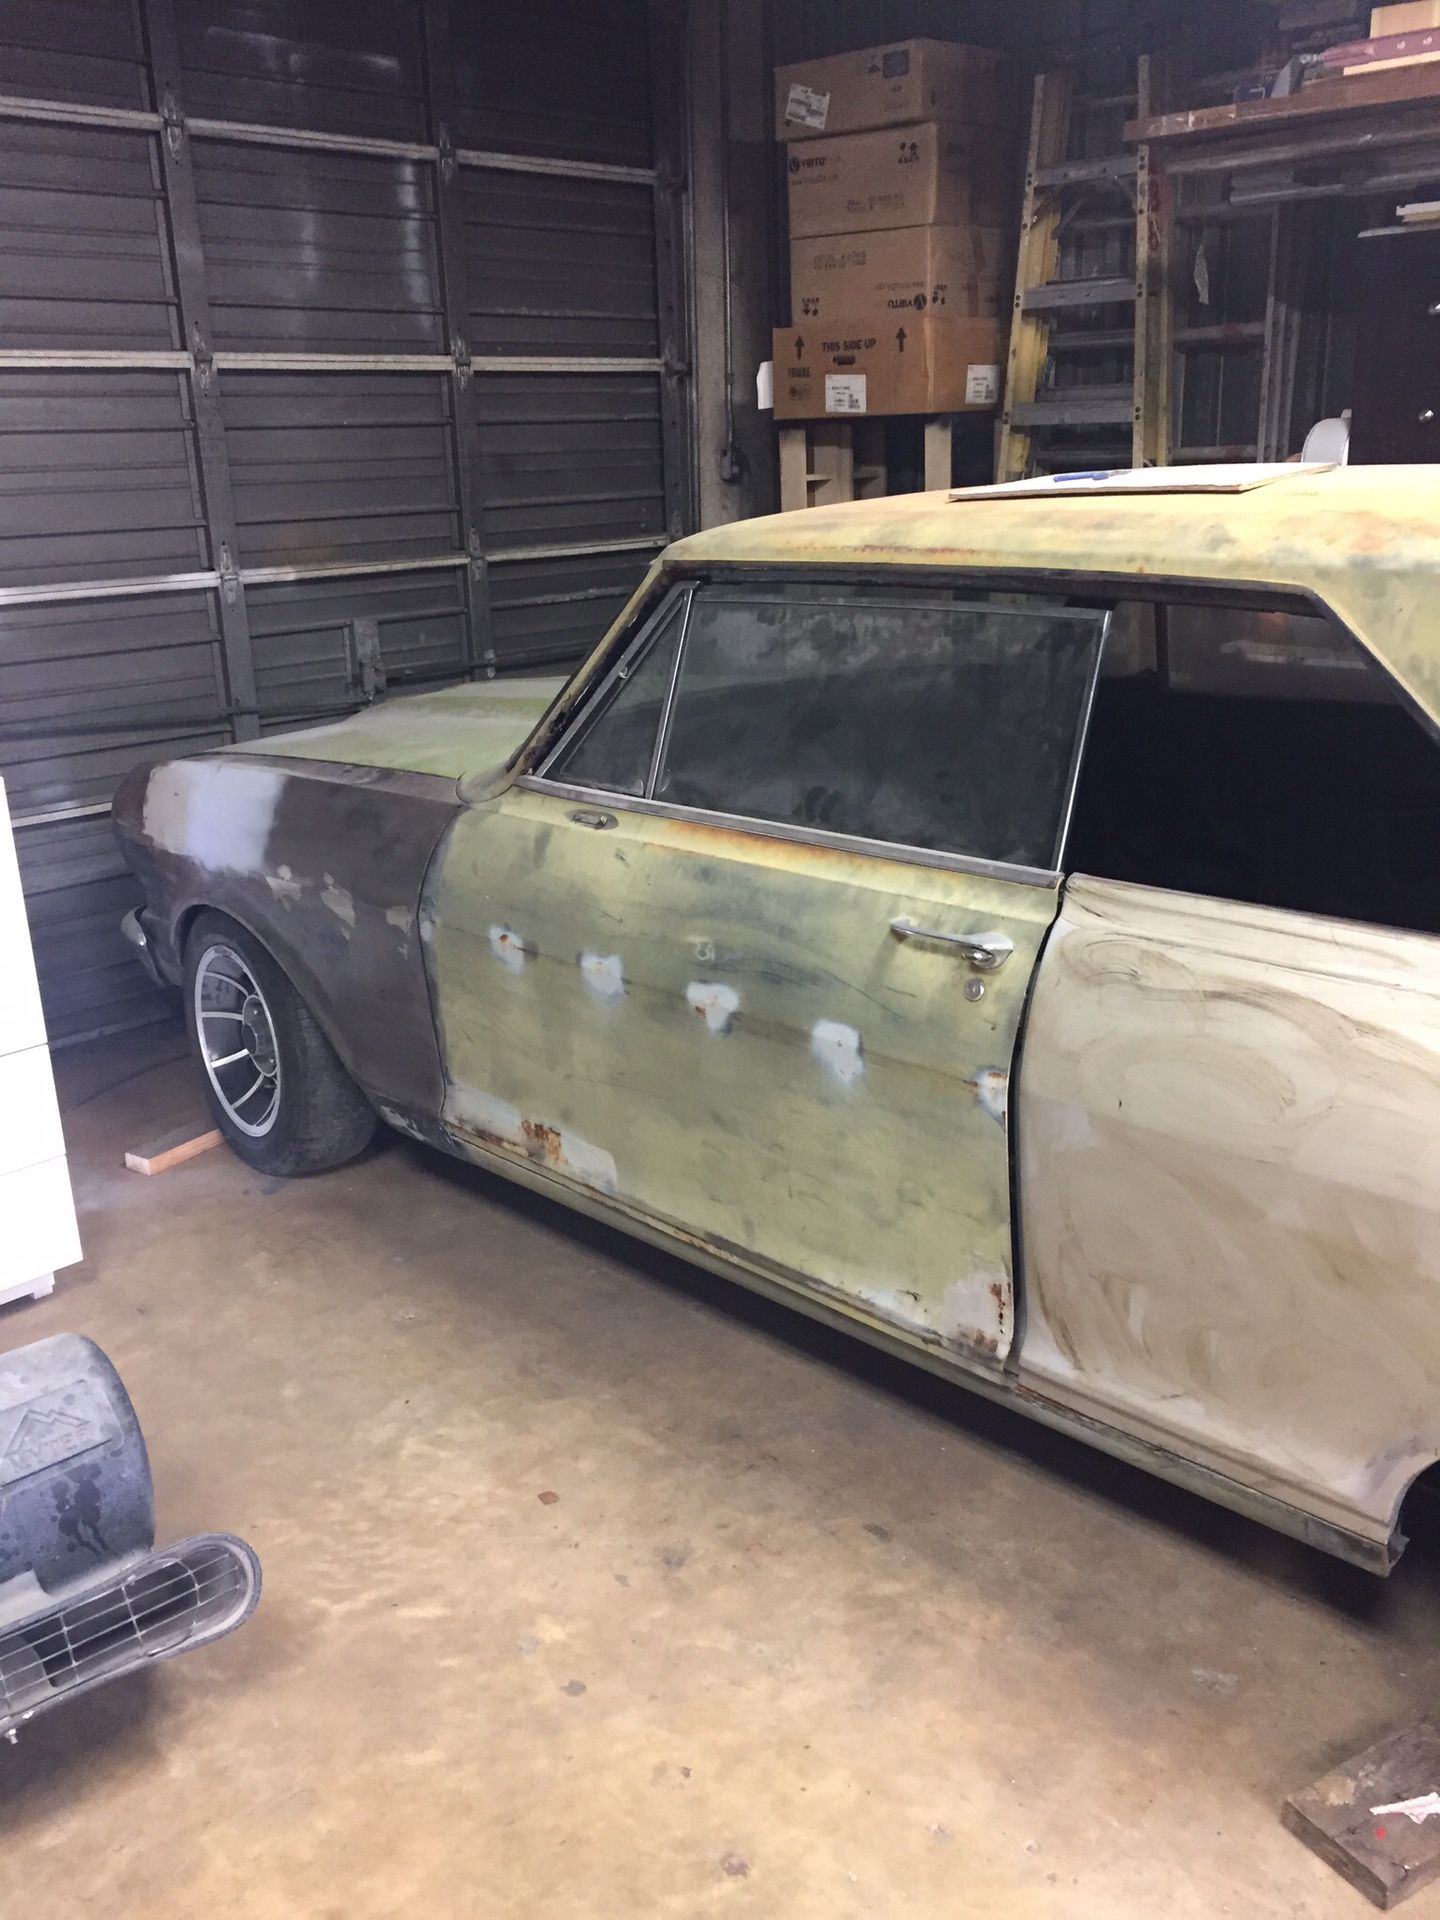 1965 Chevy nova Pro touring 2 door project car lots of parts included, 2002 LS1 corvette engine and transmission .